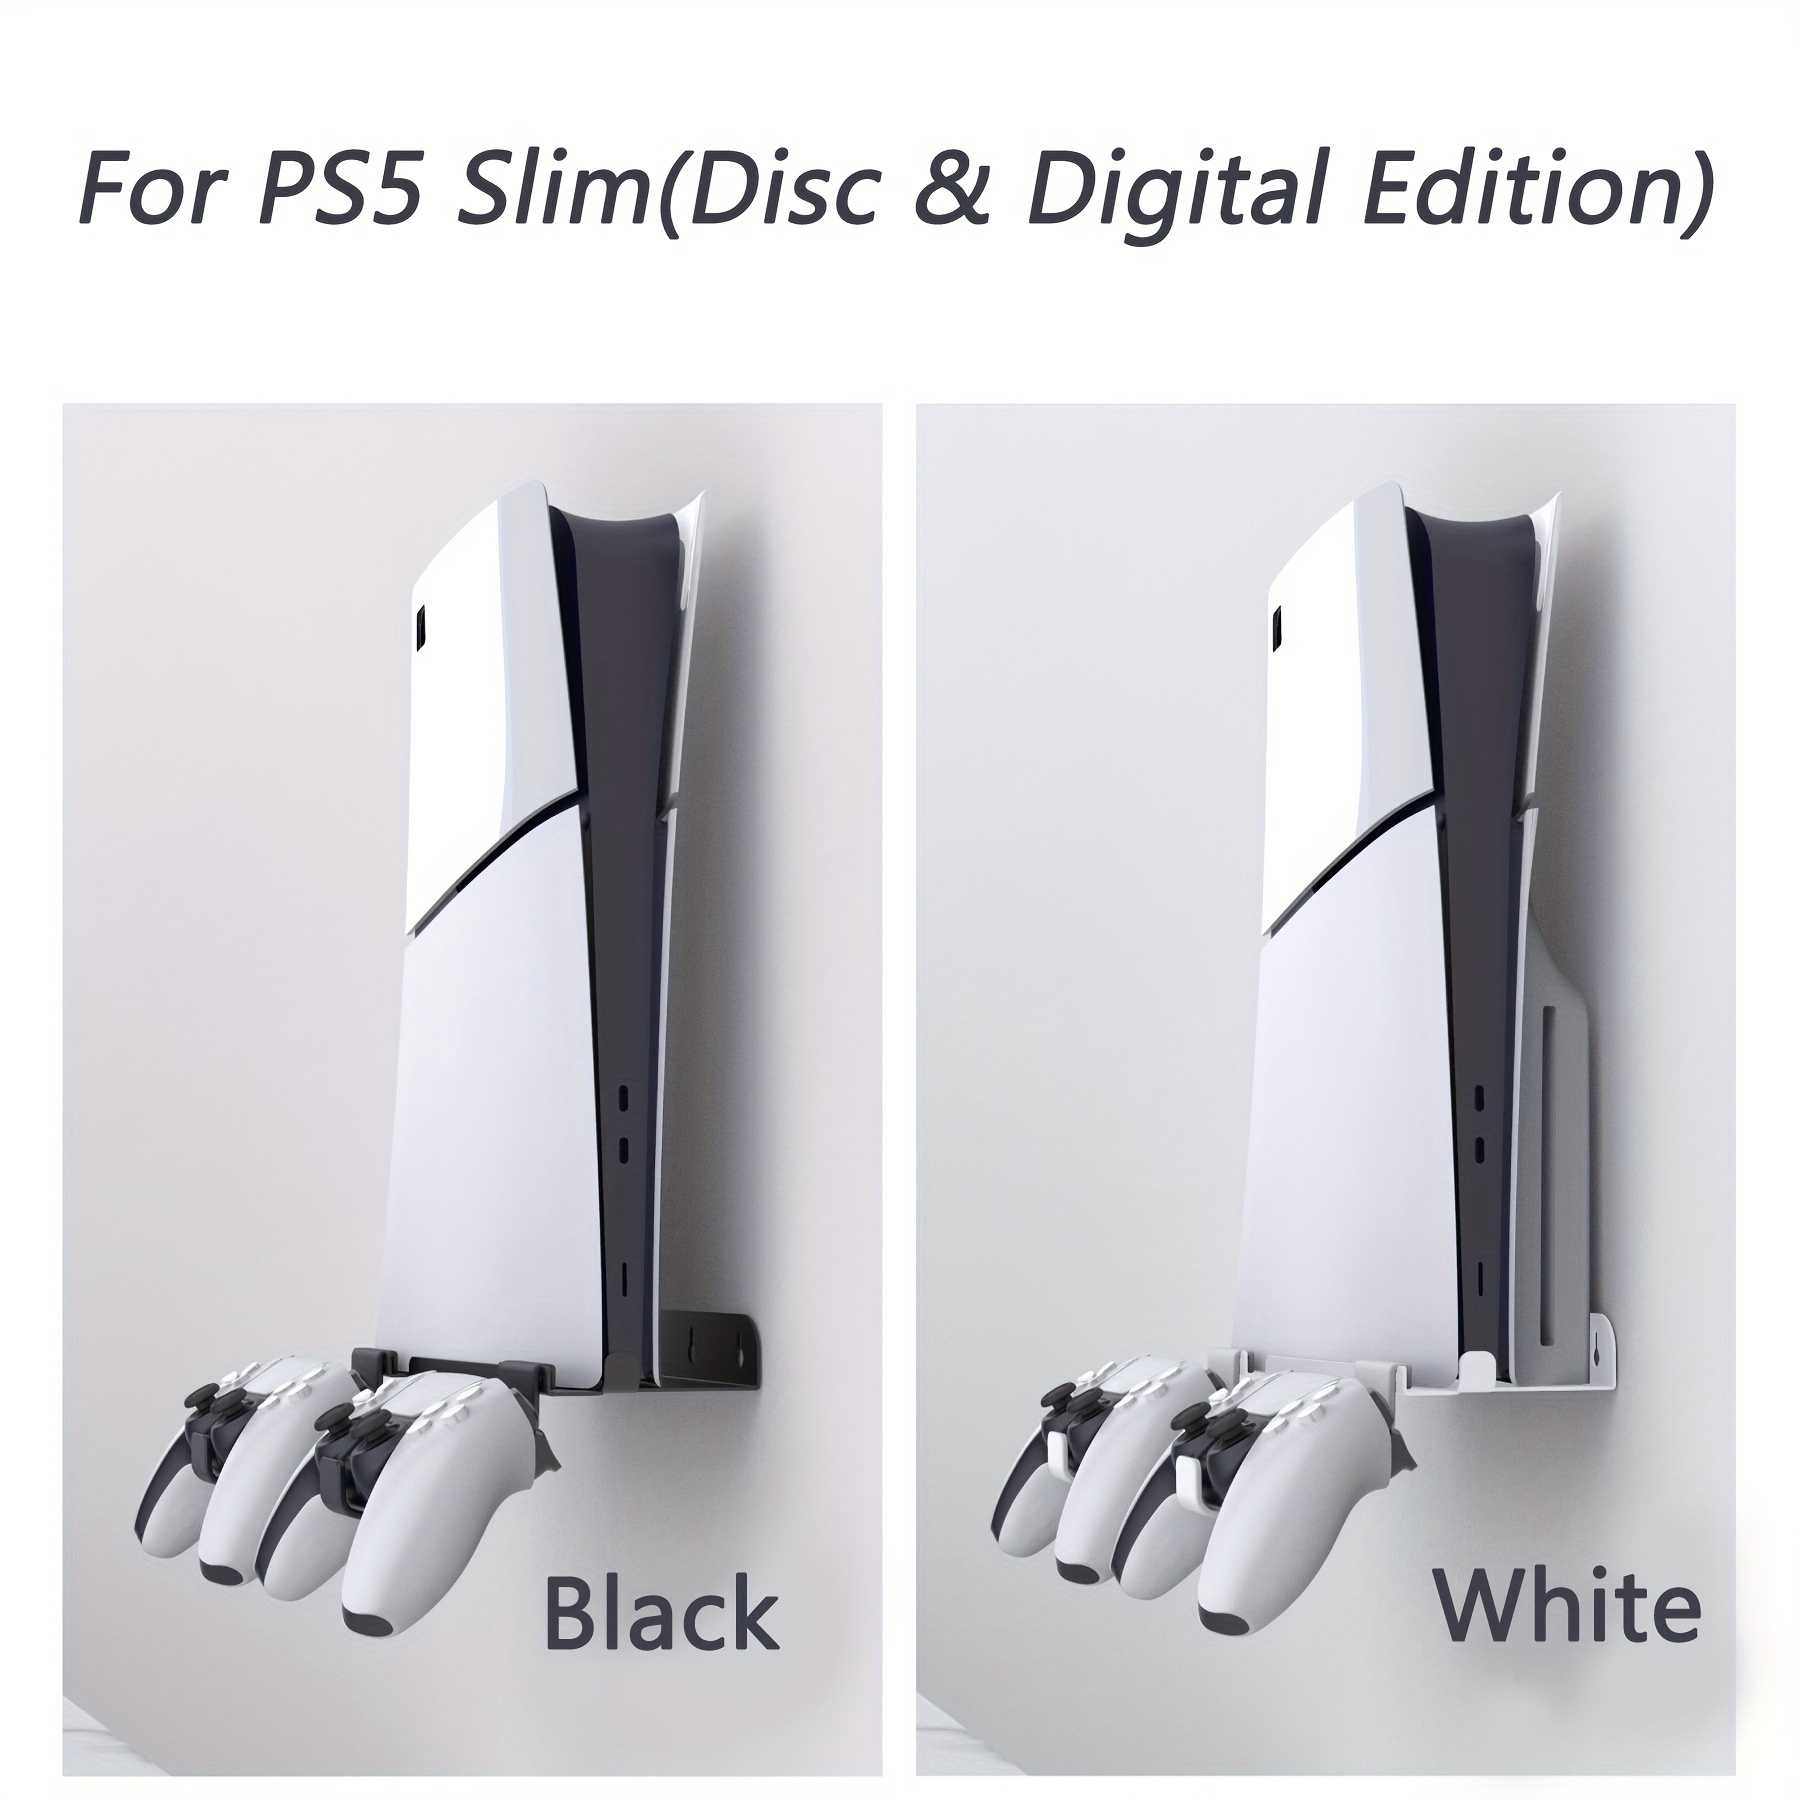 

Wall Mount Stand For Ps5 Slim(disc & Digital Edition) Steel Vertical Holder Kits For Ps5 Slim Console And Sturdy Floating New Ps5 Wall Mount With Screw Fixing